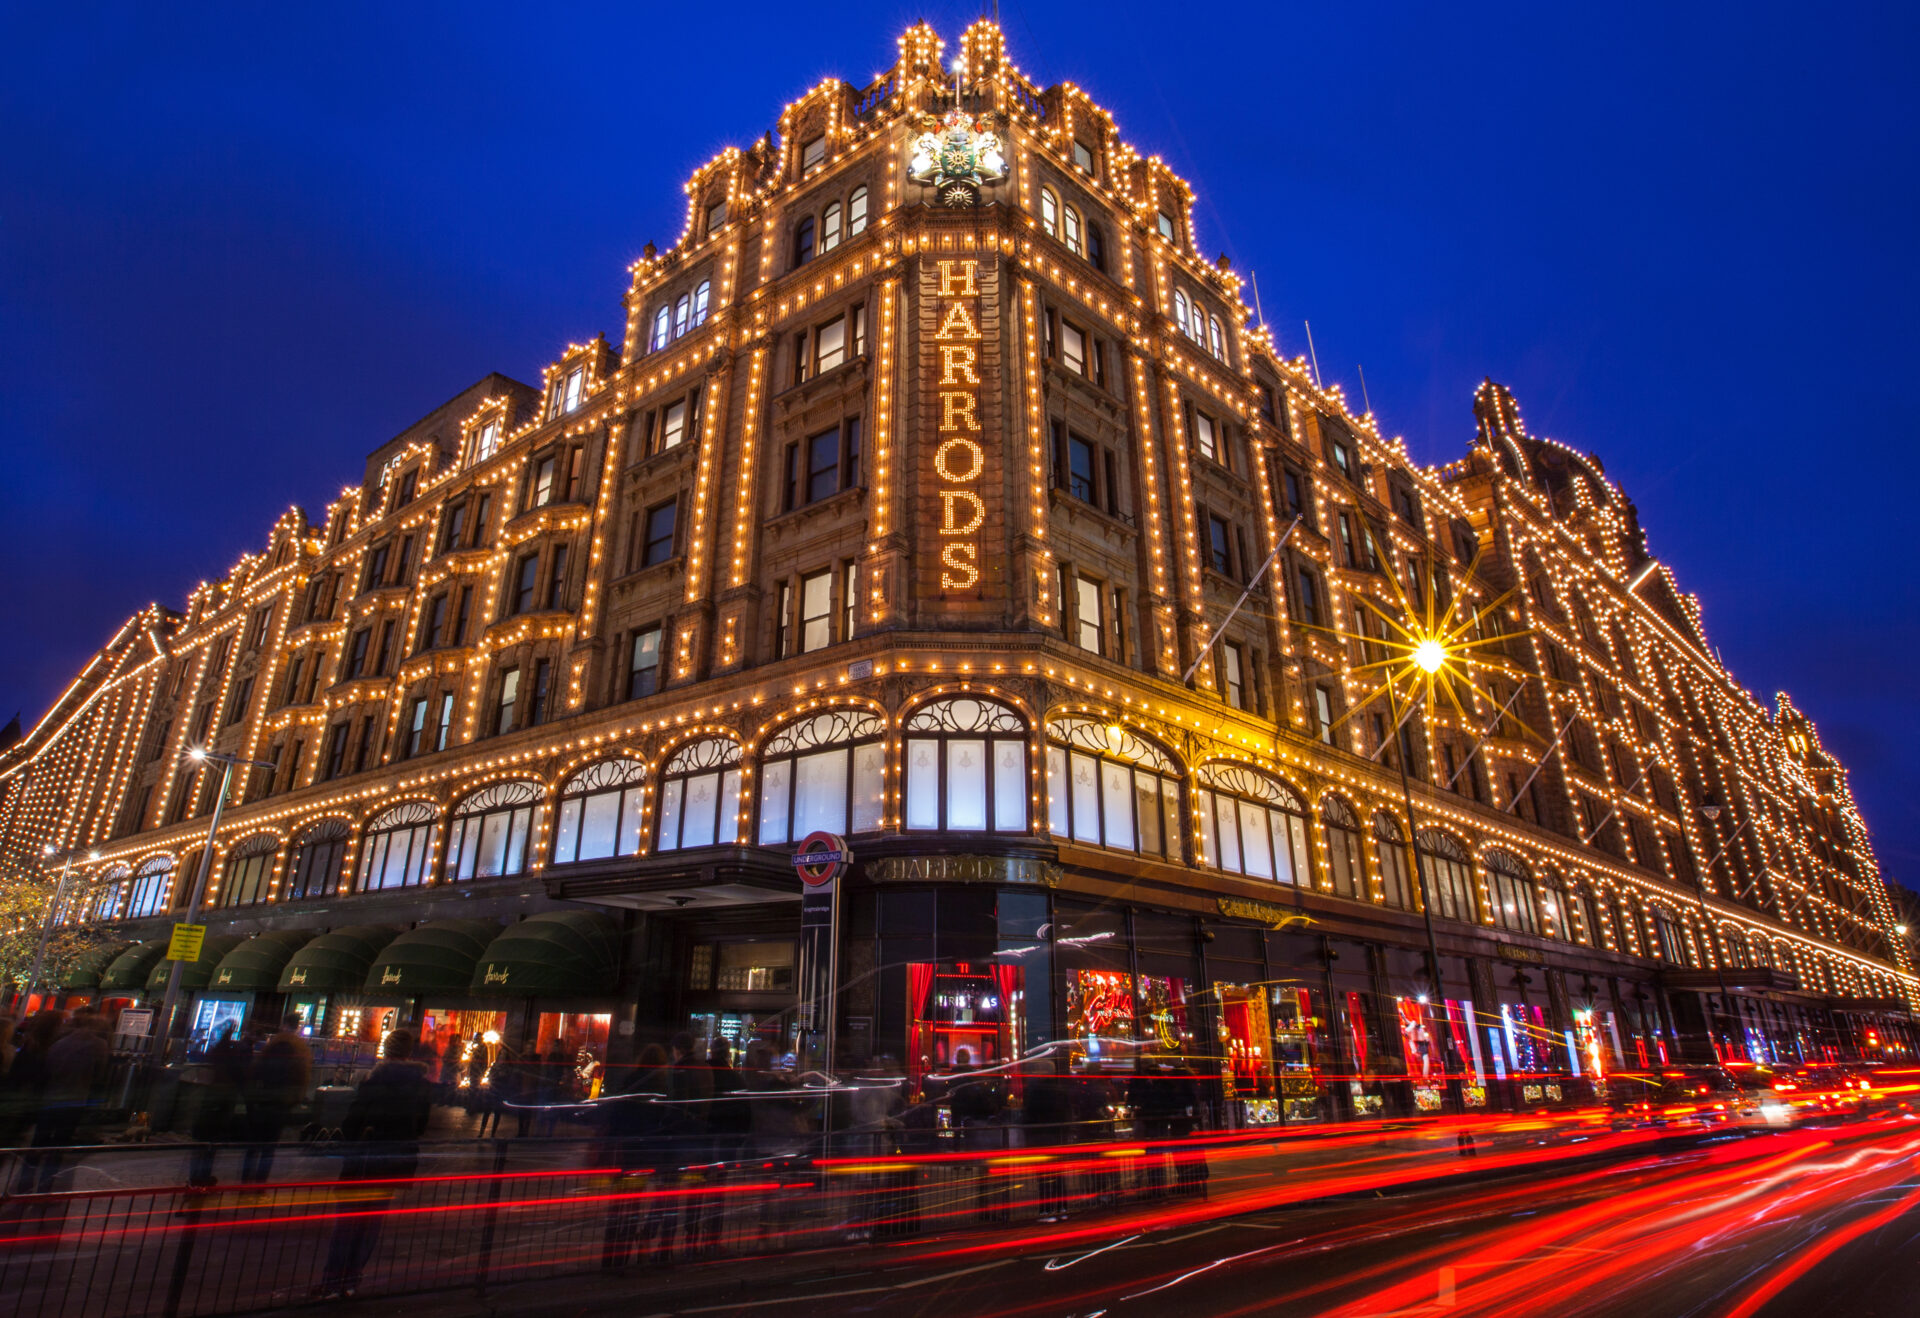 10 SHOPS IN KNIGHTSBRIDGE THAT CAN’T BE MISSED